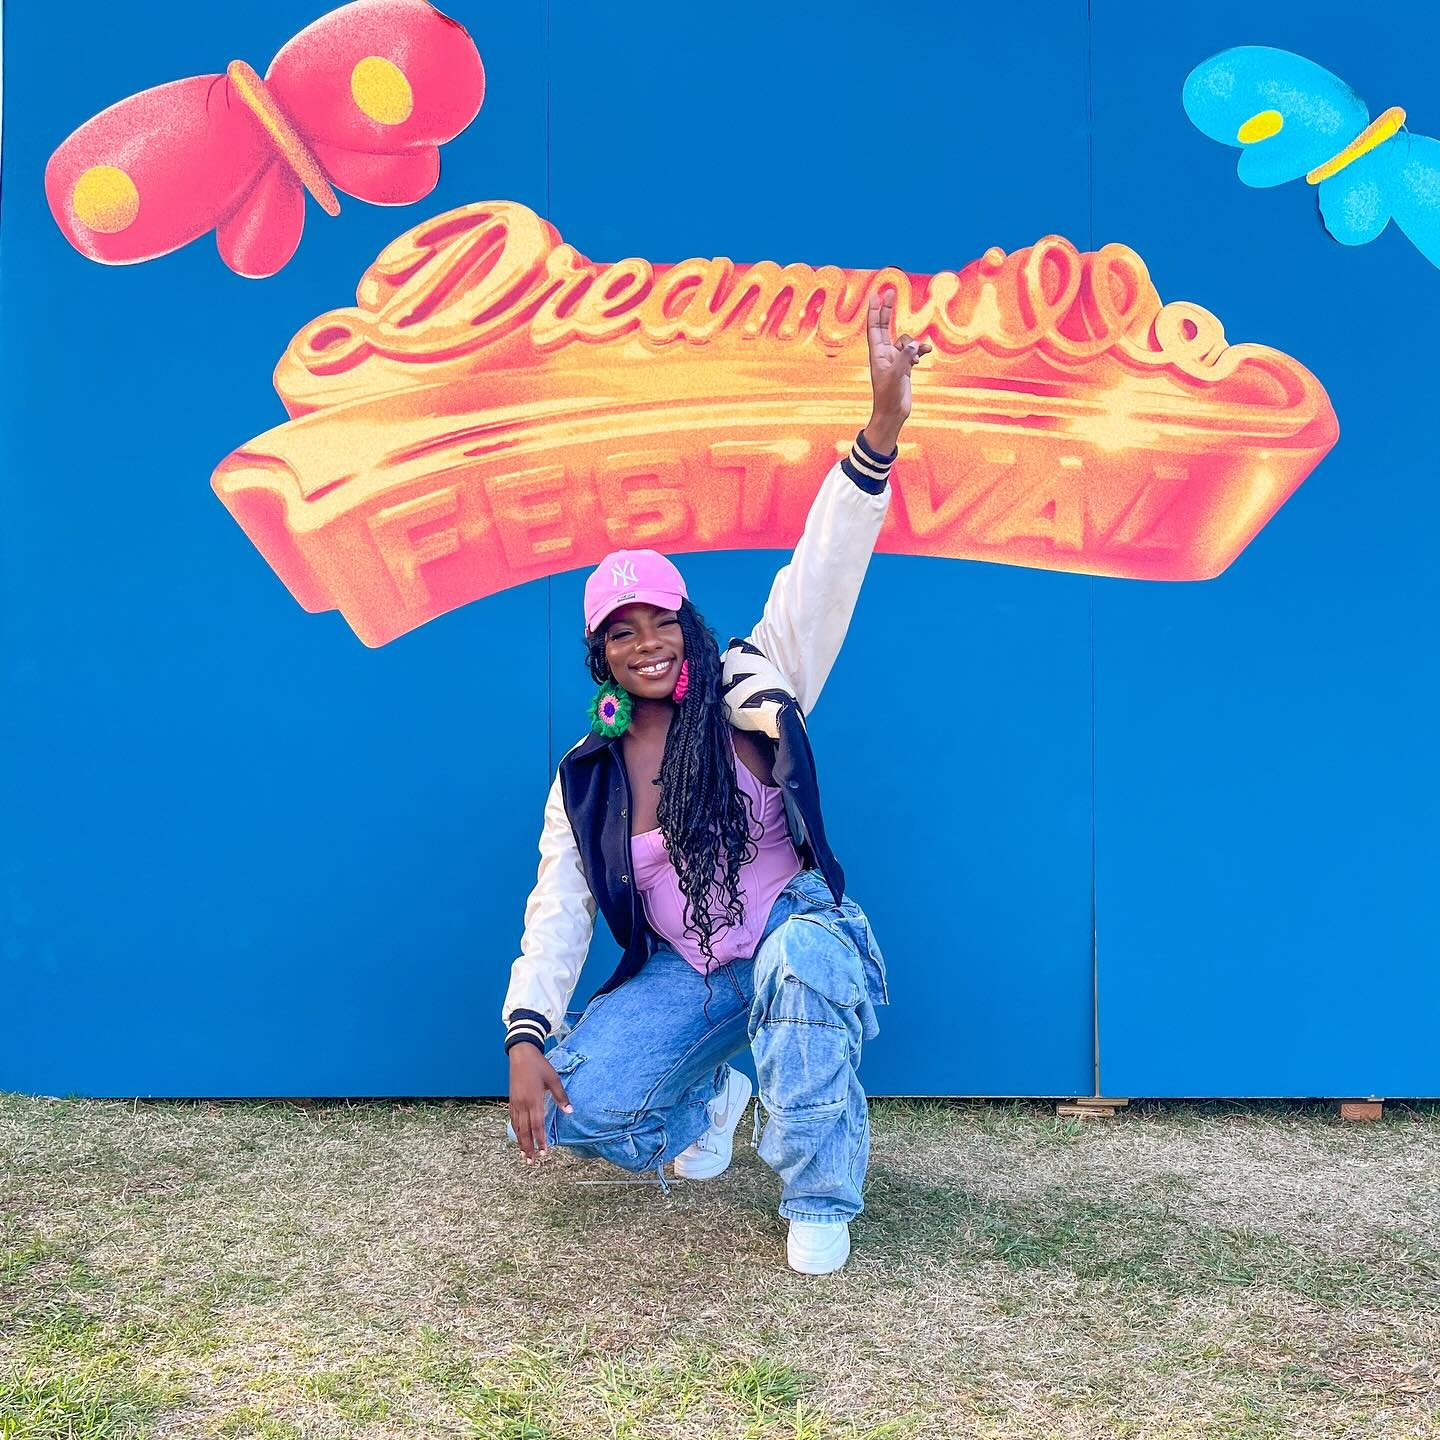 Year 3. ✌🏾🌻🎡 #dreamvillefest is always a vibe and I finally vlogged it! Go check it out 🥰